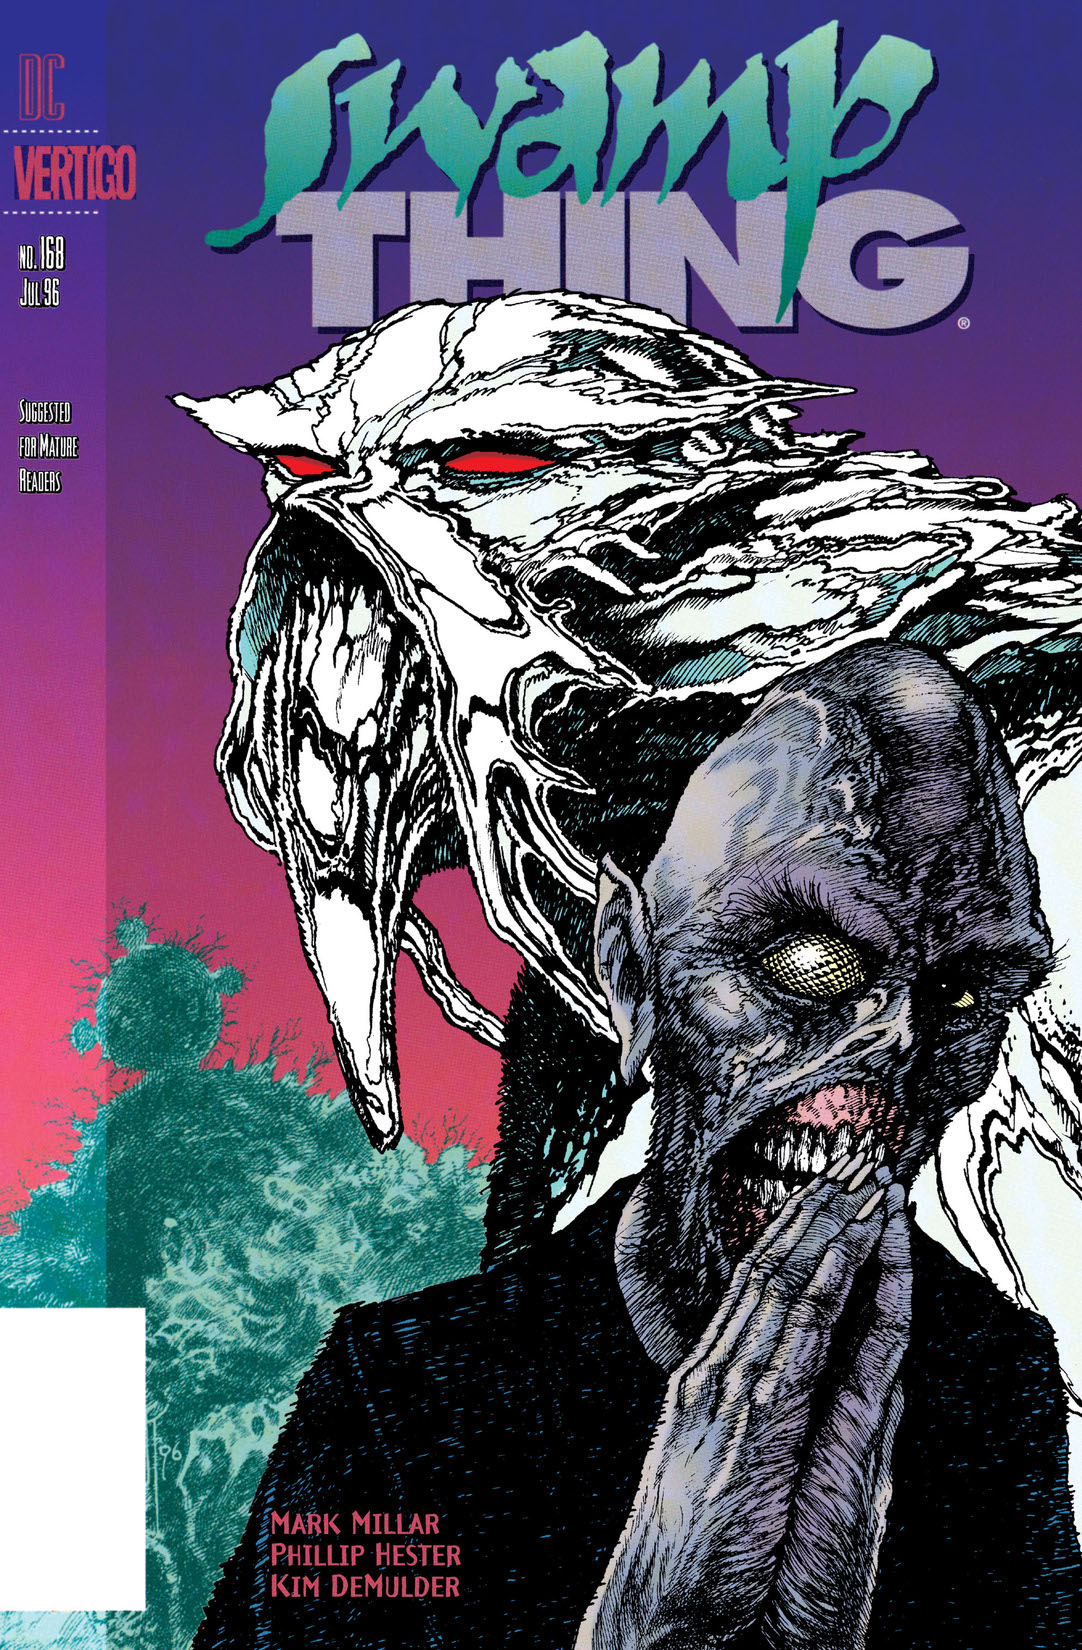 Swamp Thing (1985-) #168 preview images